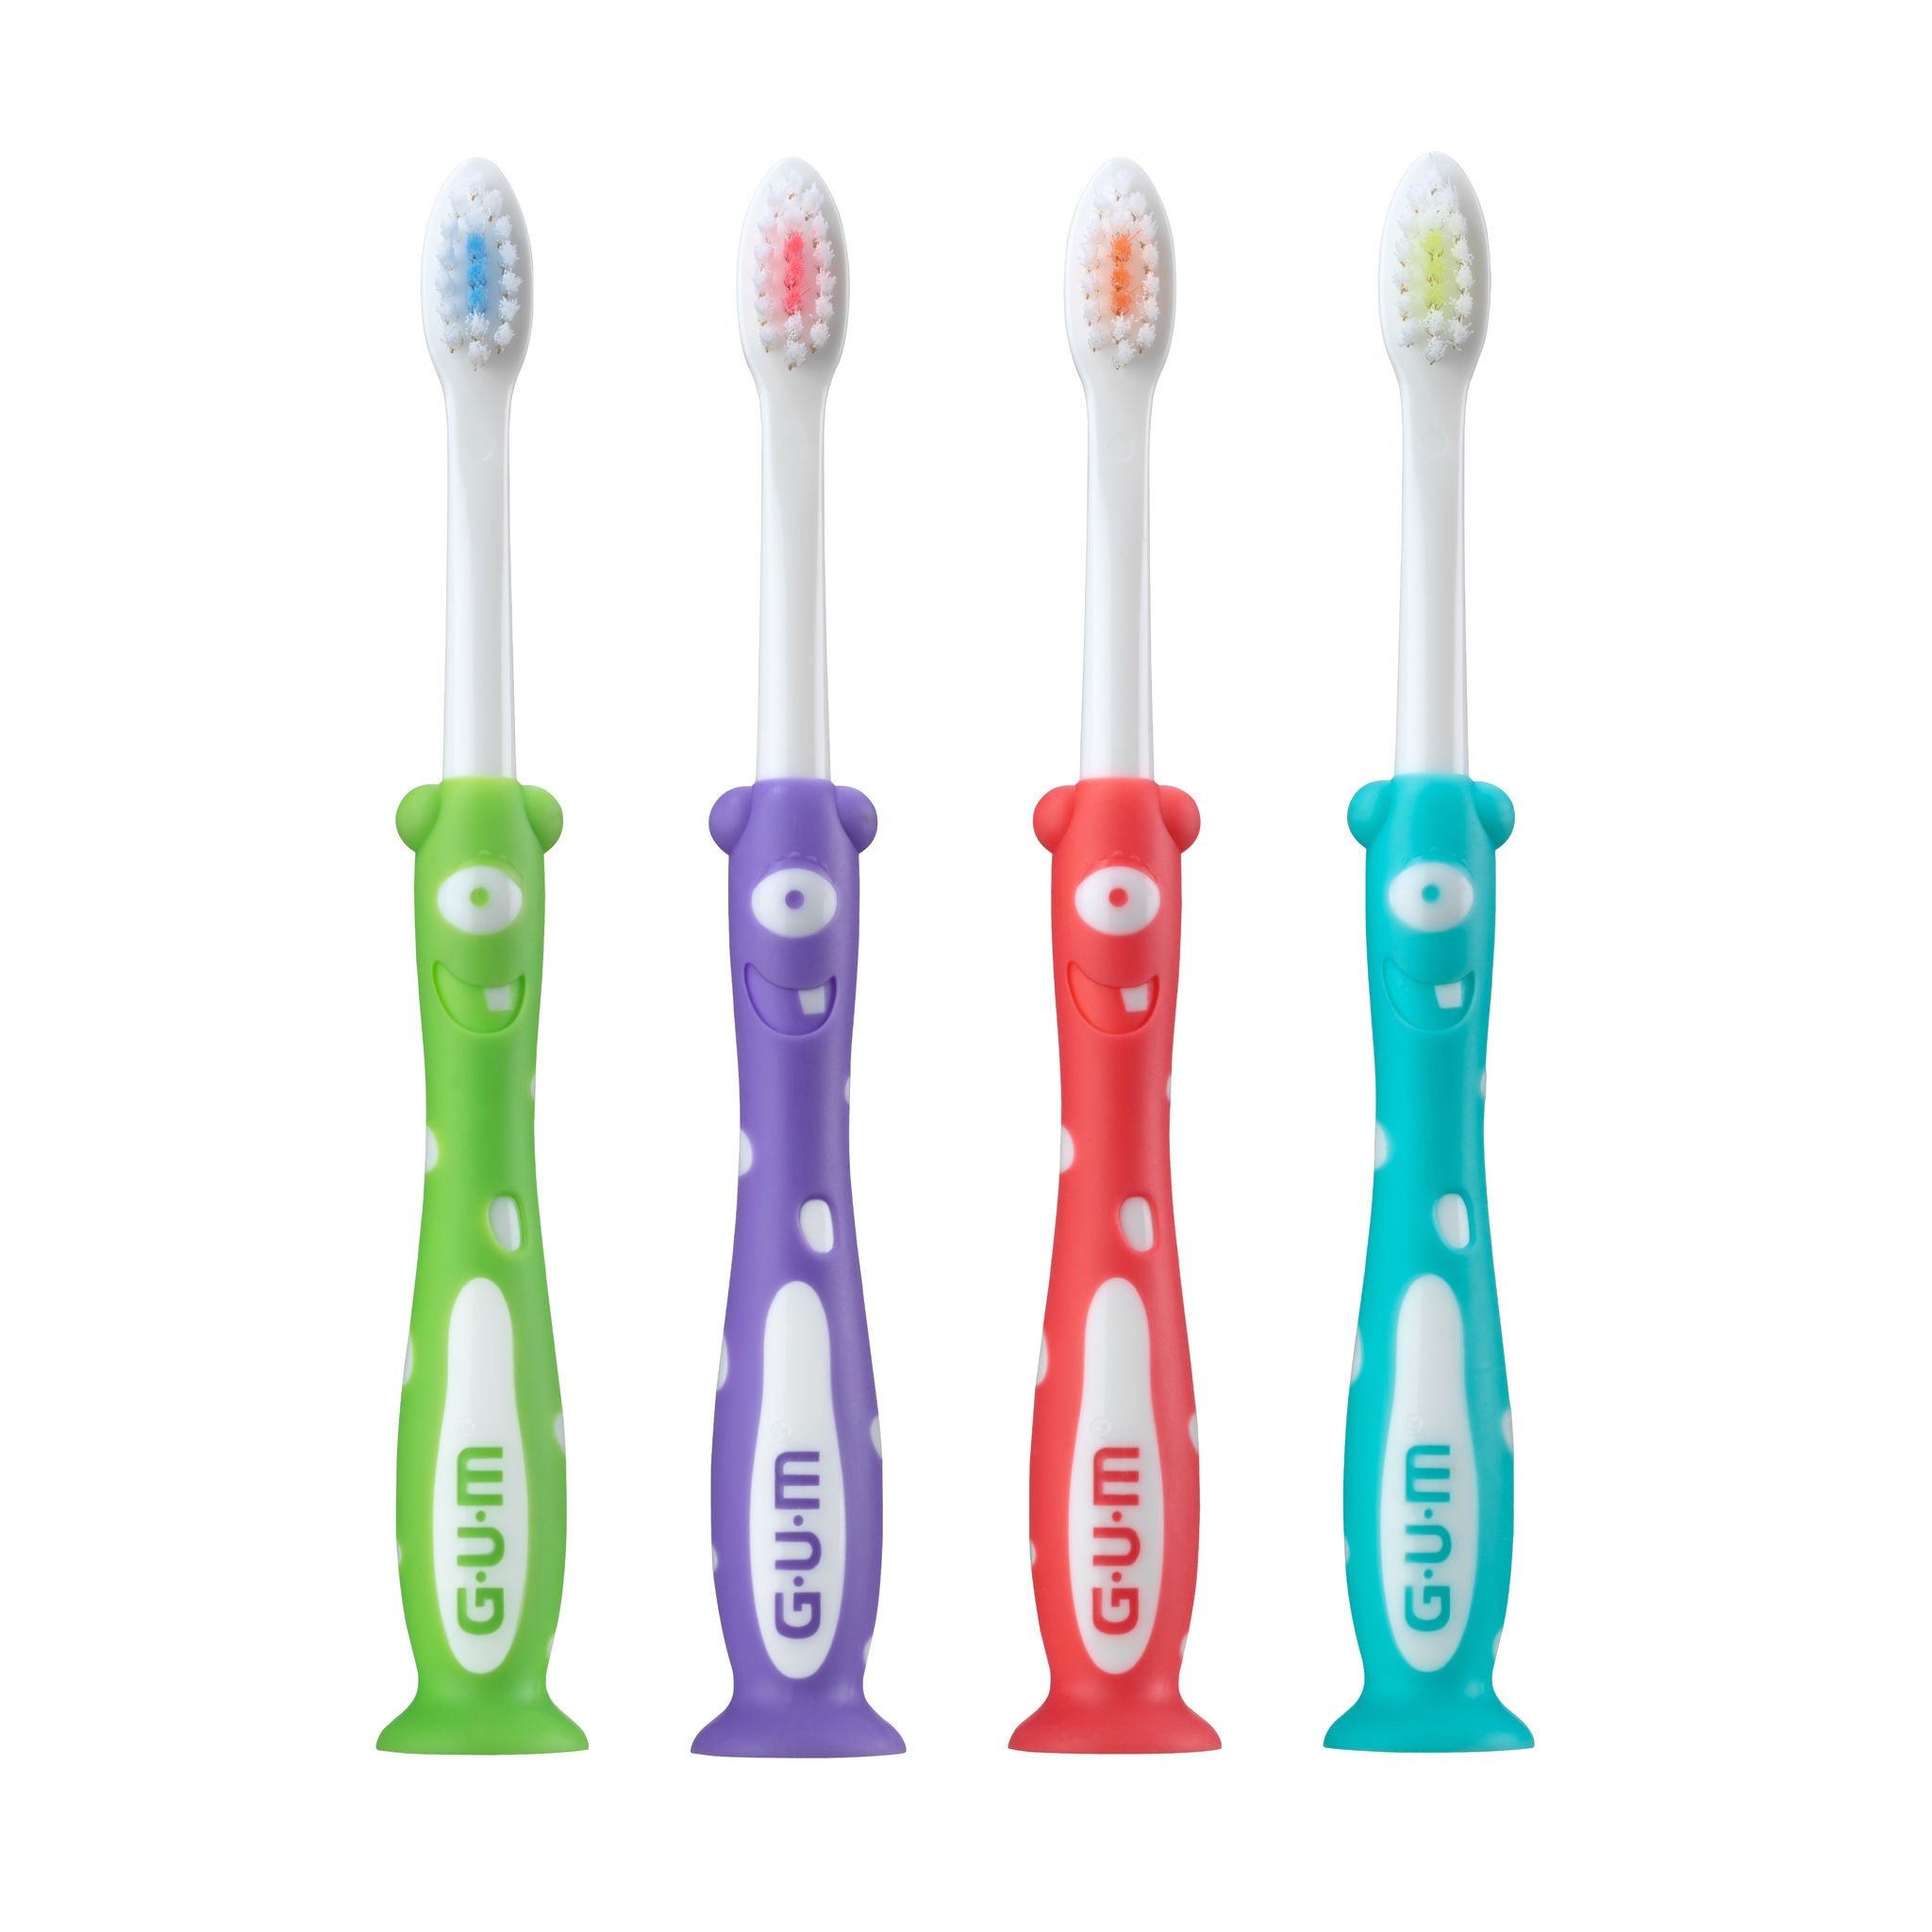 901-Product-Toothbrush-Manual-Monsterz-Kids-naked-4colors.jpg